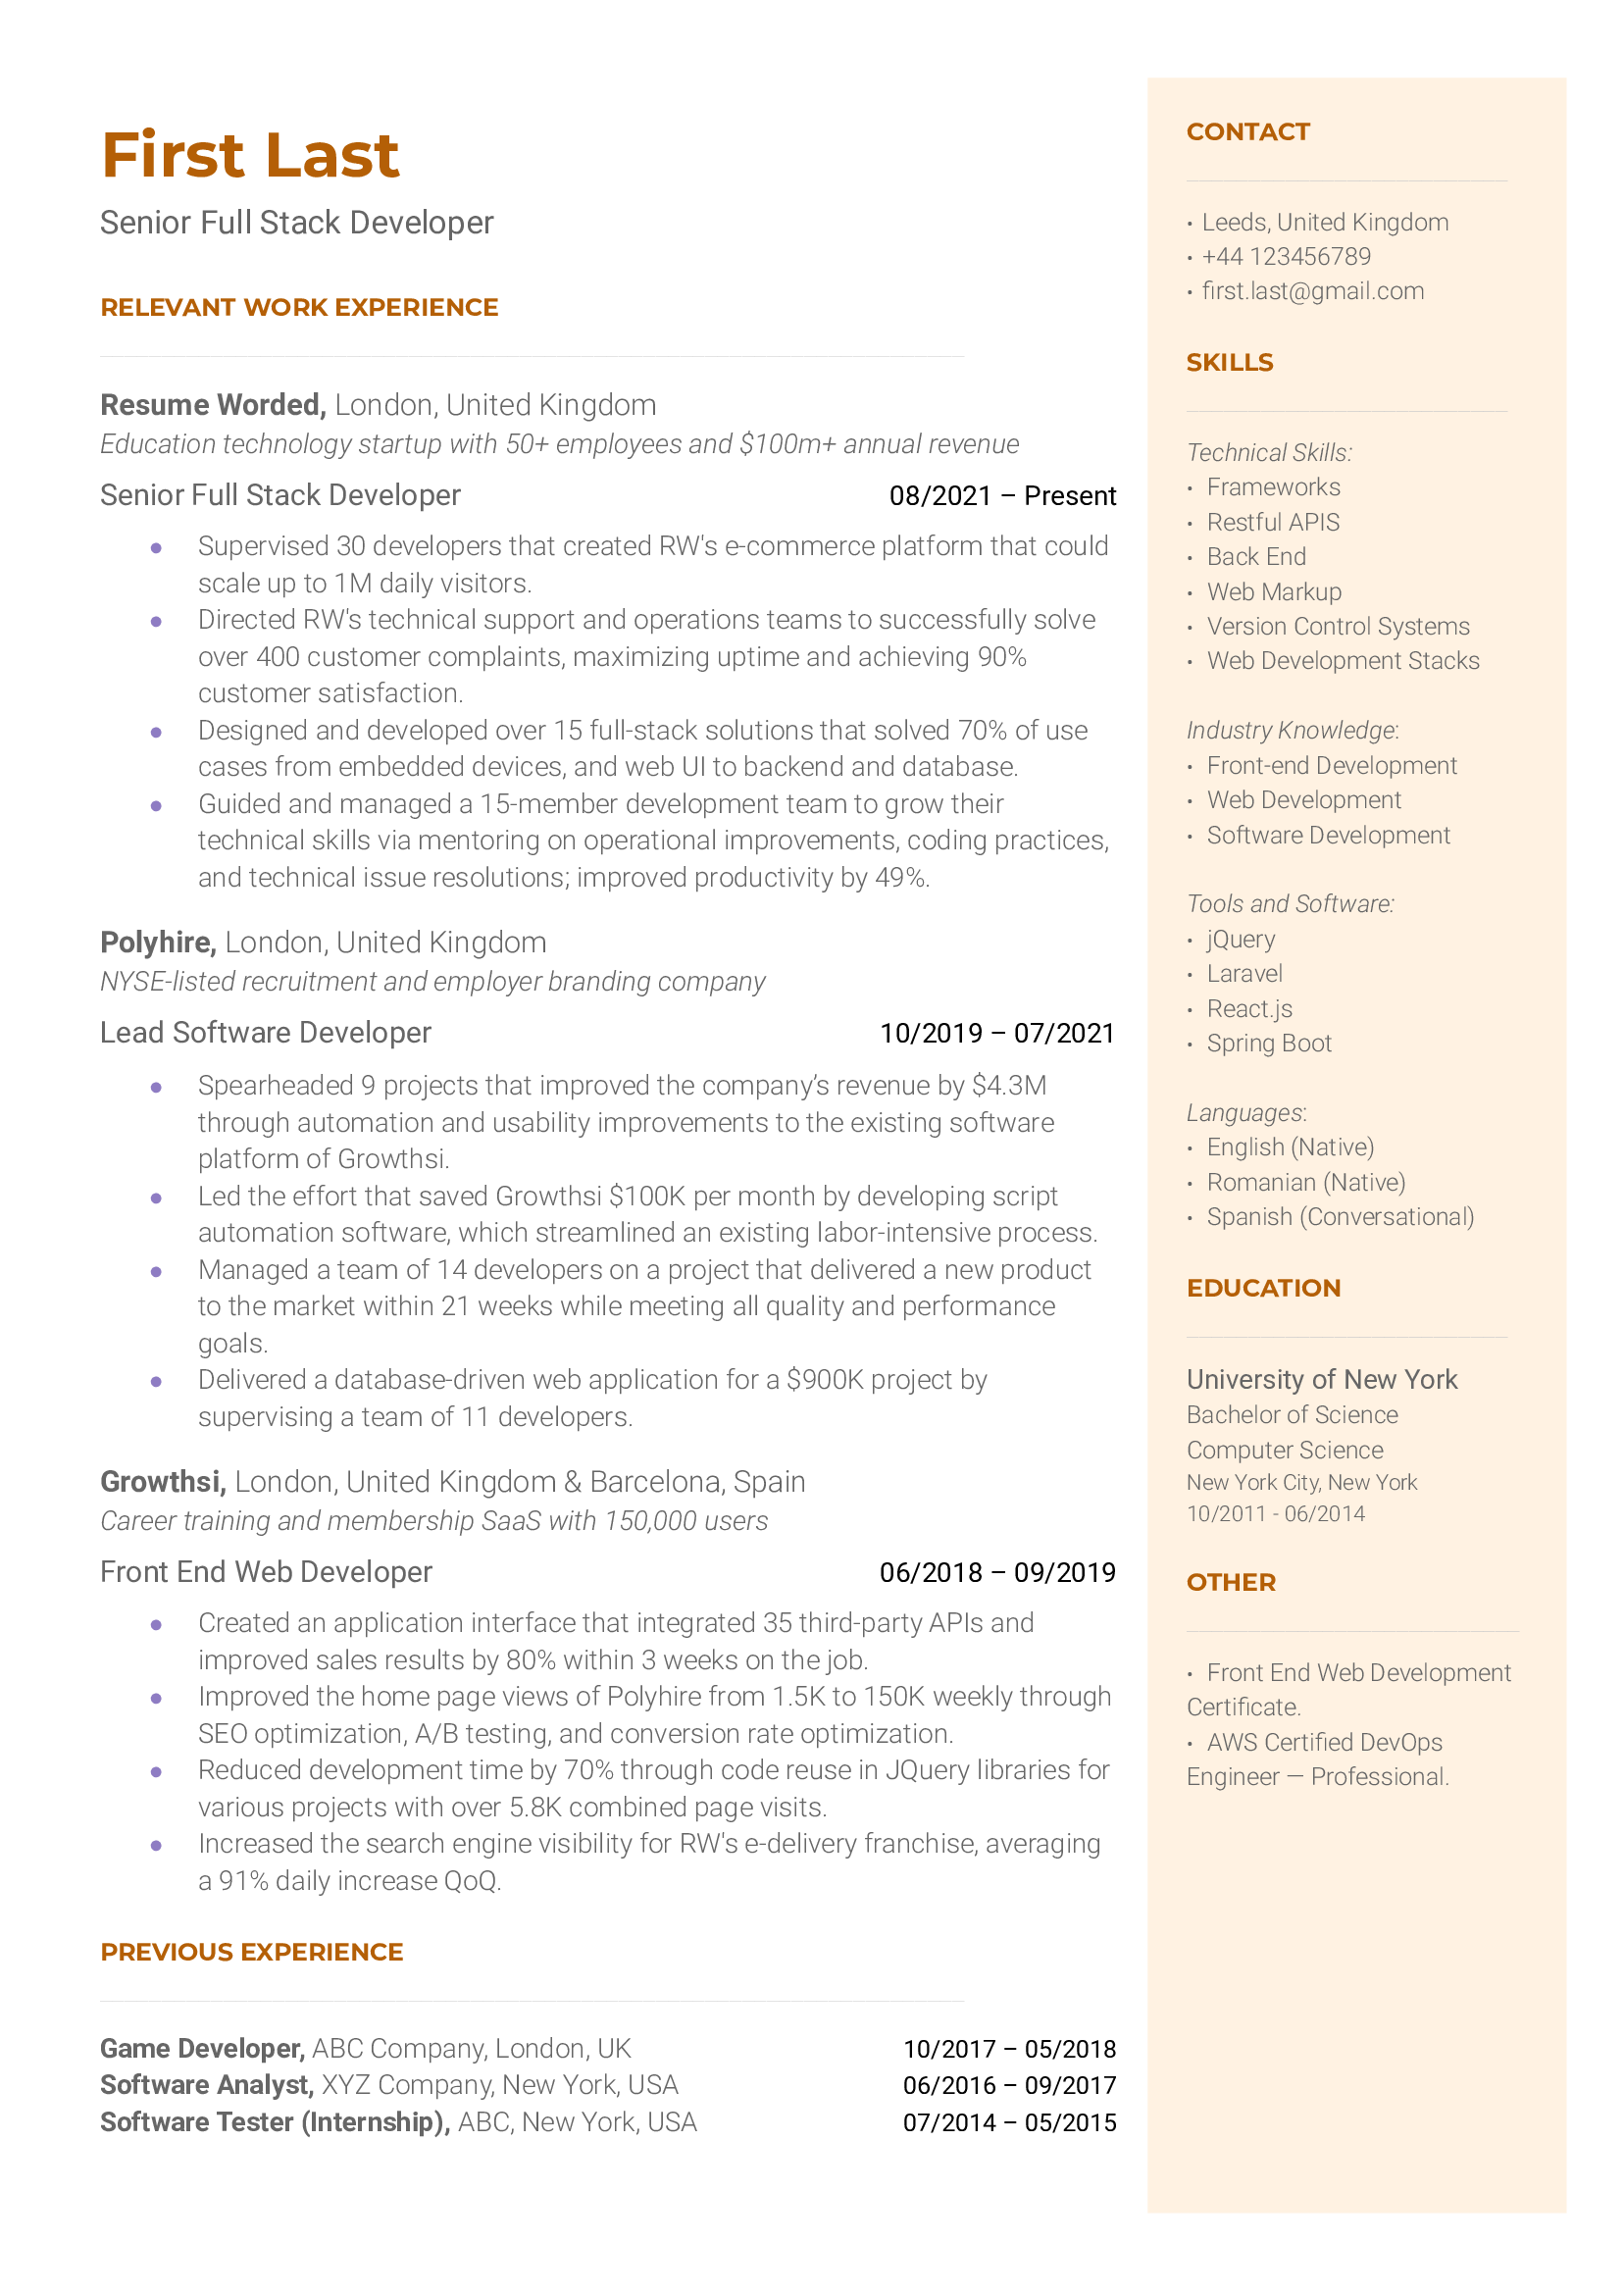 A senior full-stack developer resume sample that highlights the applicant’s qualifications and strong software developer background.